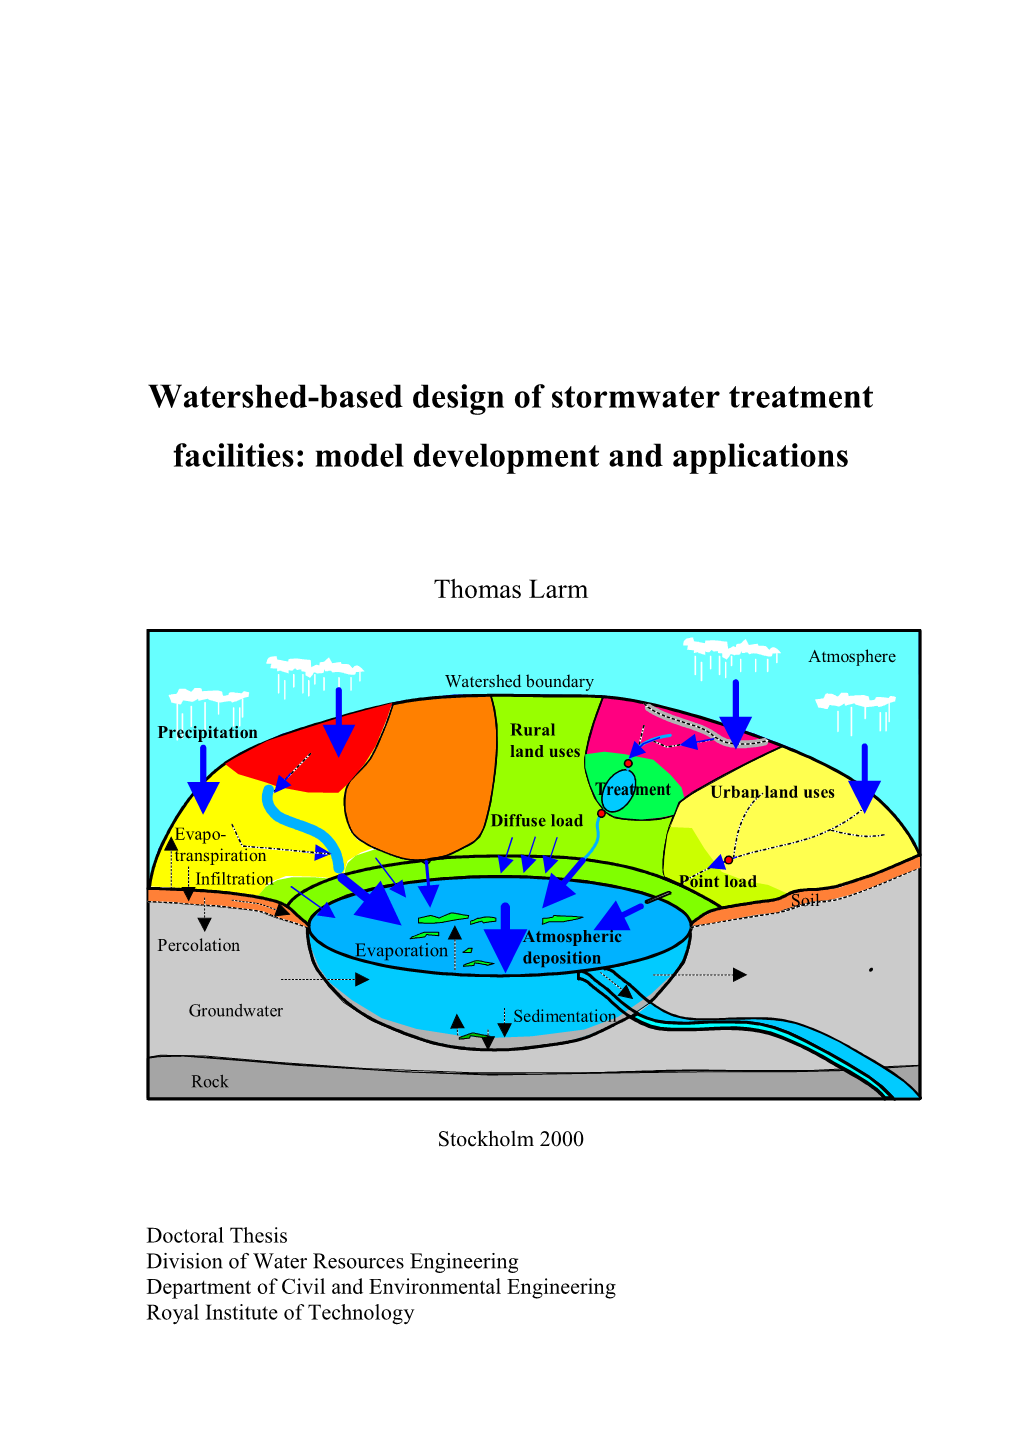 Watershed-Based Design of Stormwater Treatment Facilities: Model Development and Applications